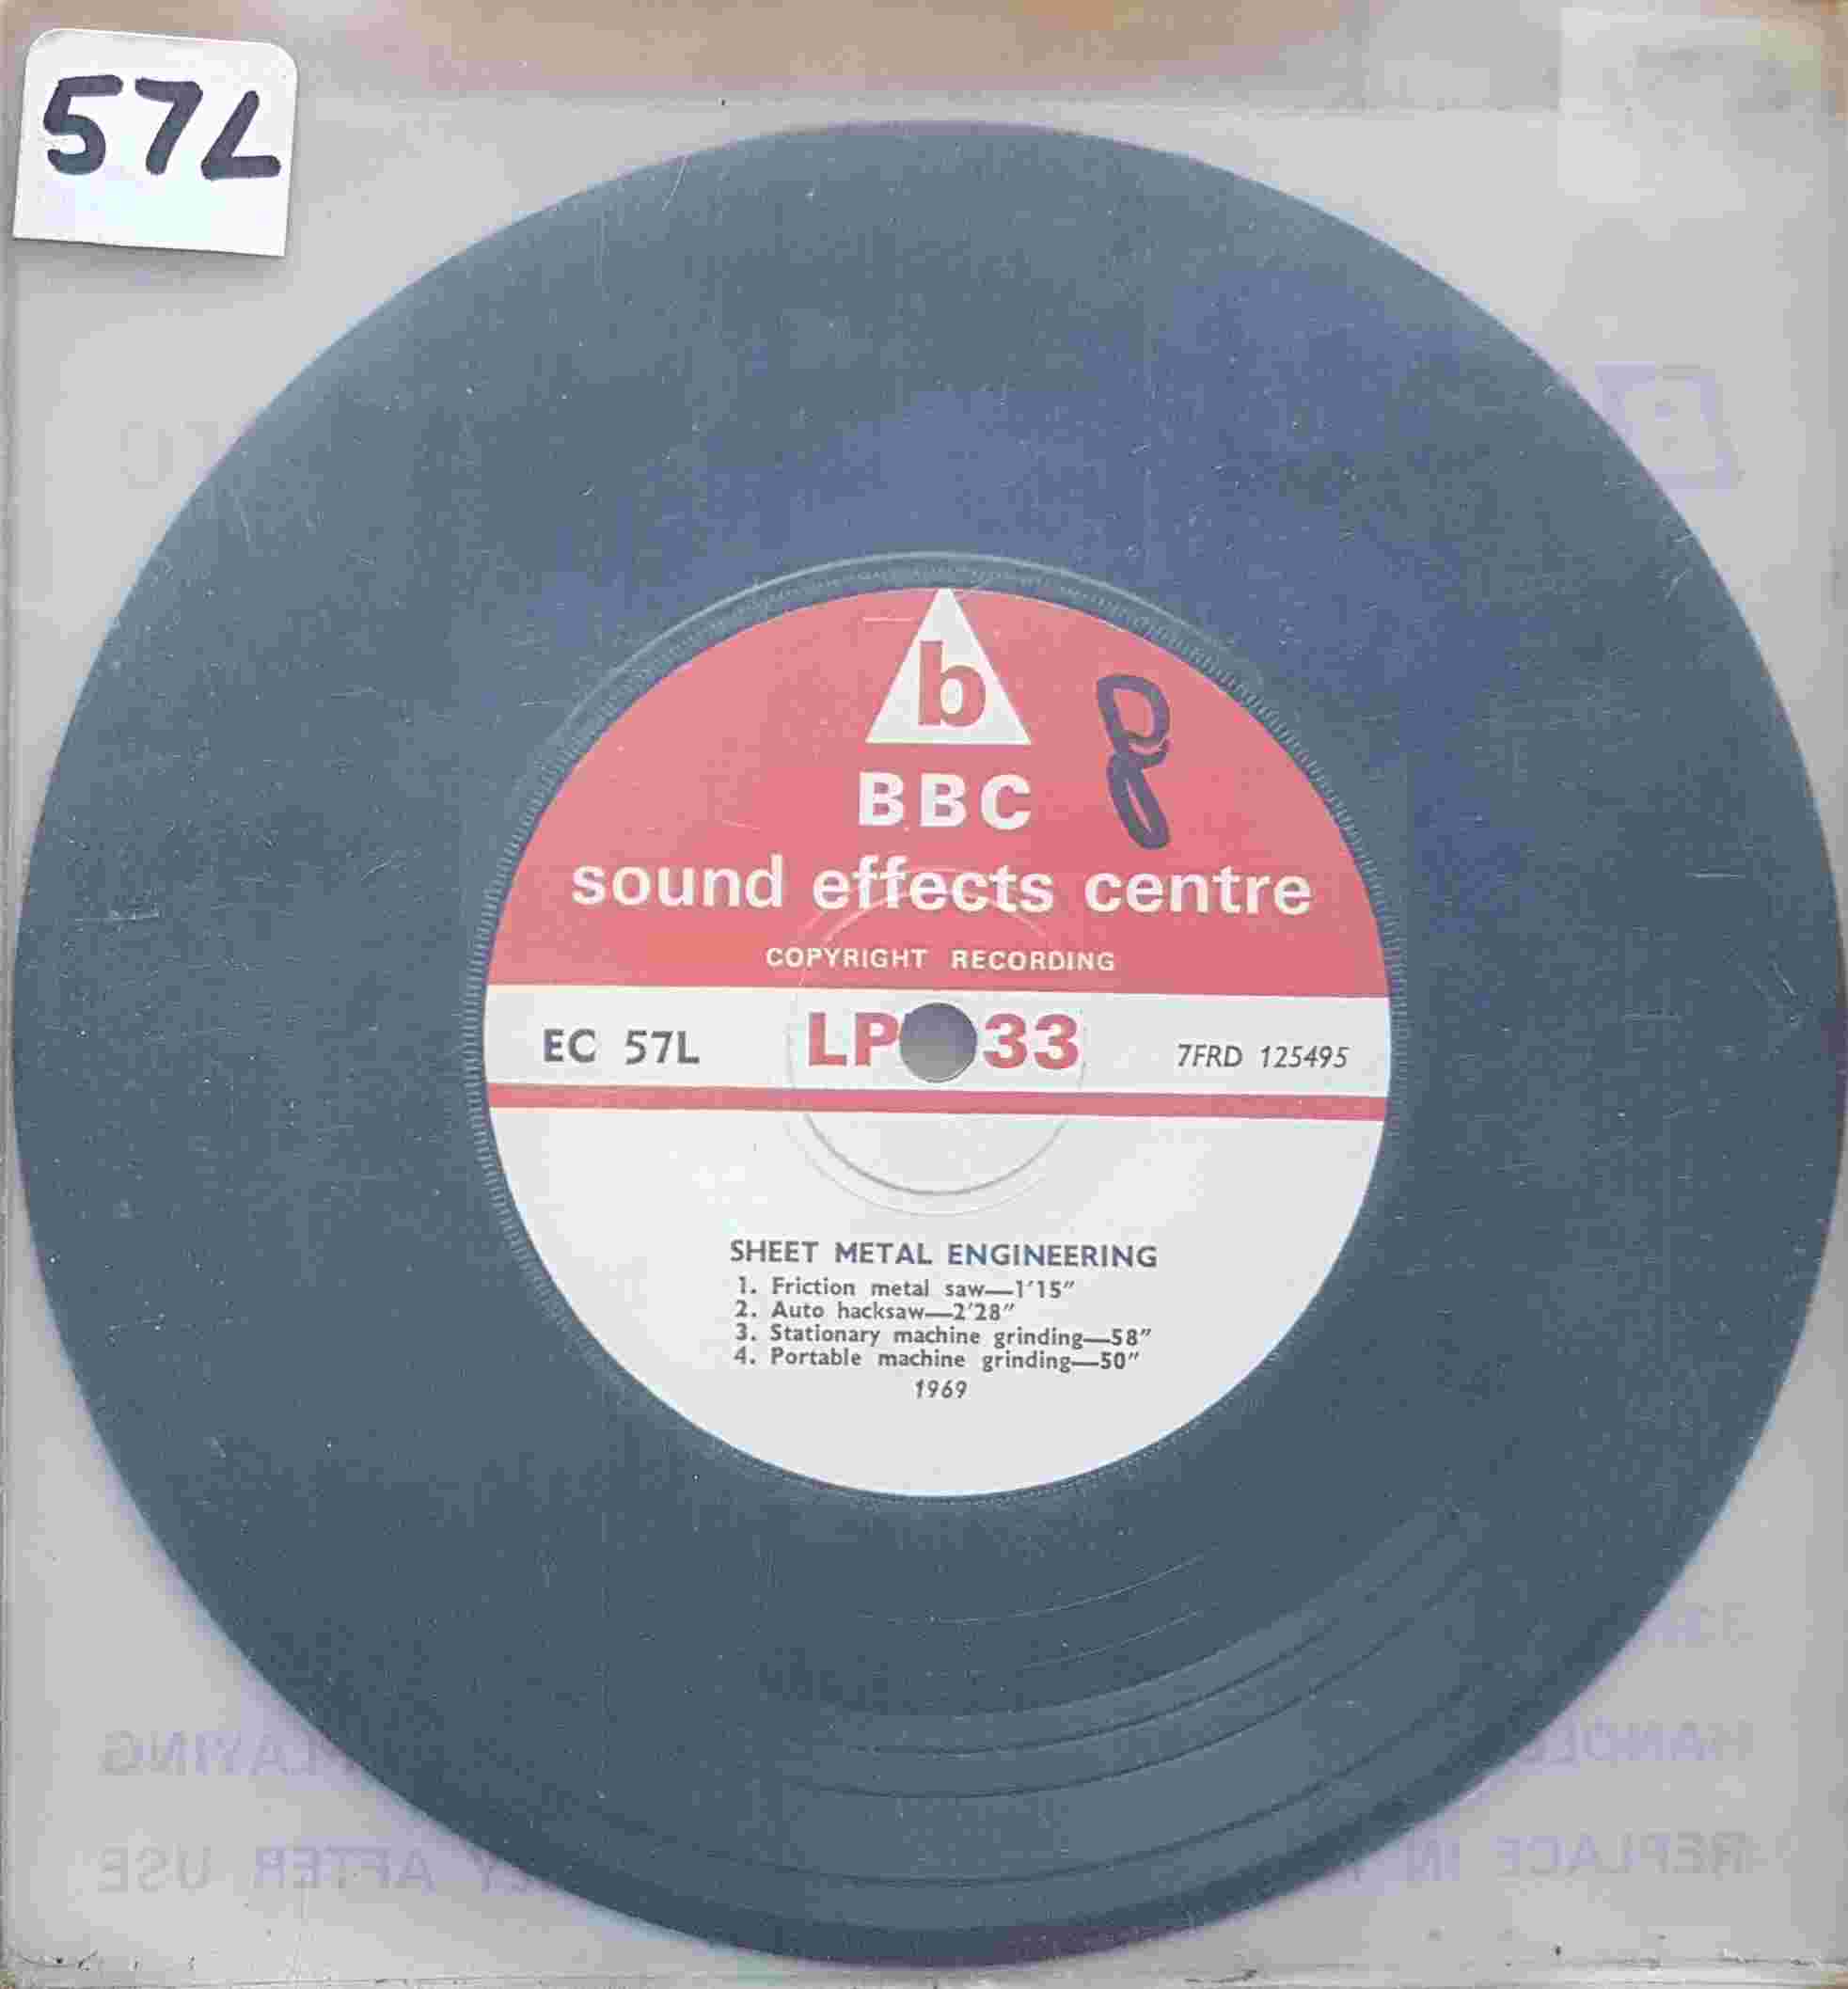 Picture of EC 57L Sheet metal engineering by artist Not registered from the BBC records and Tapes library